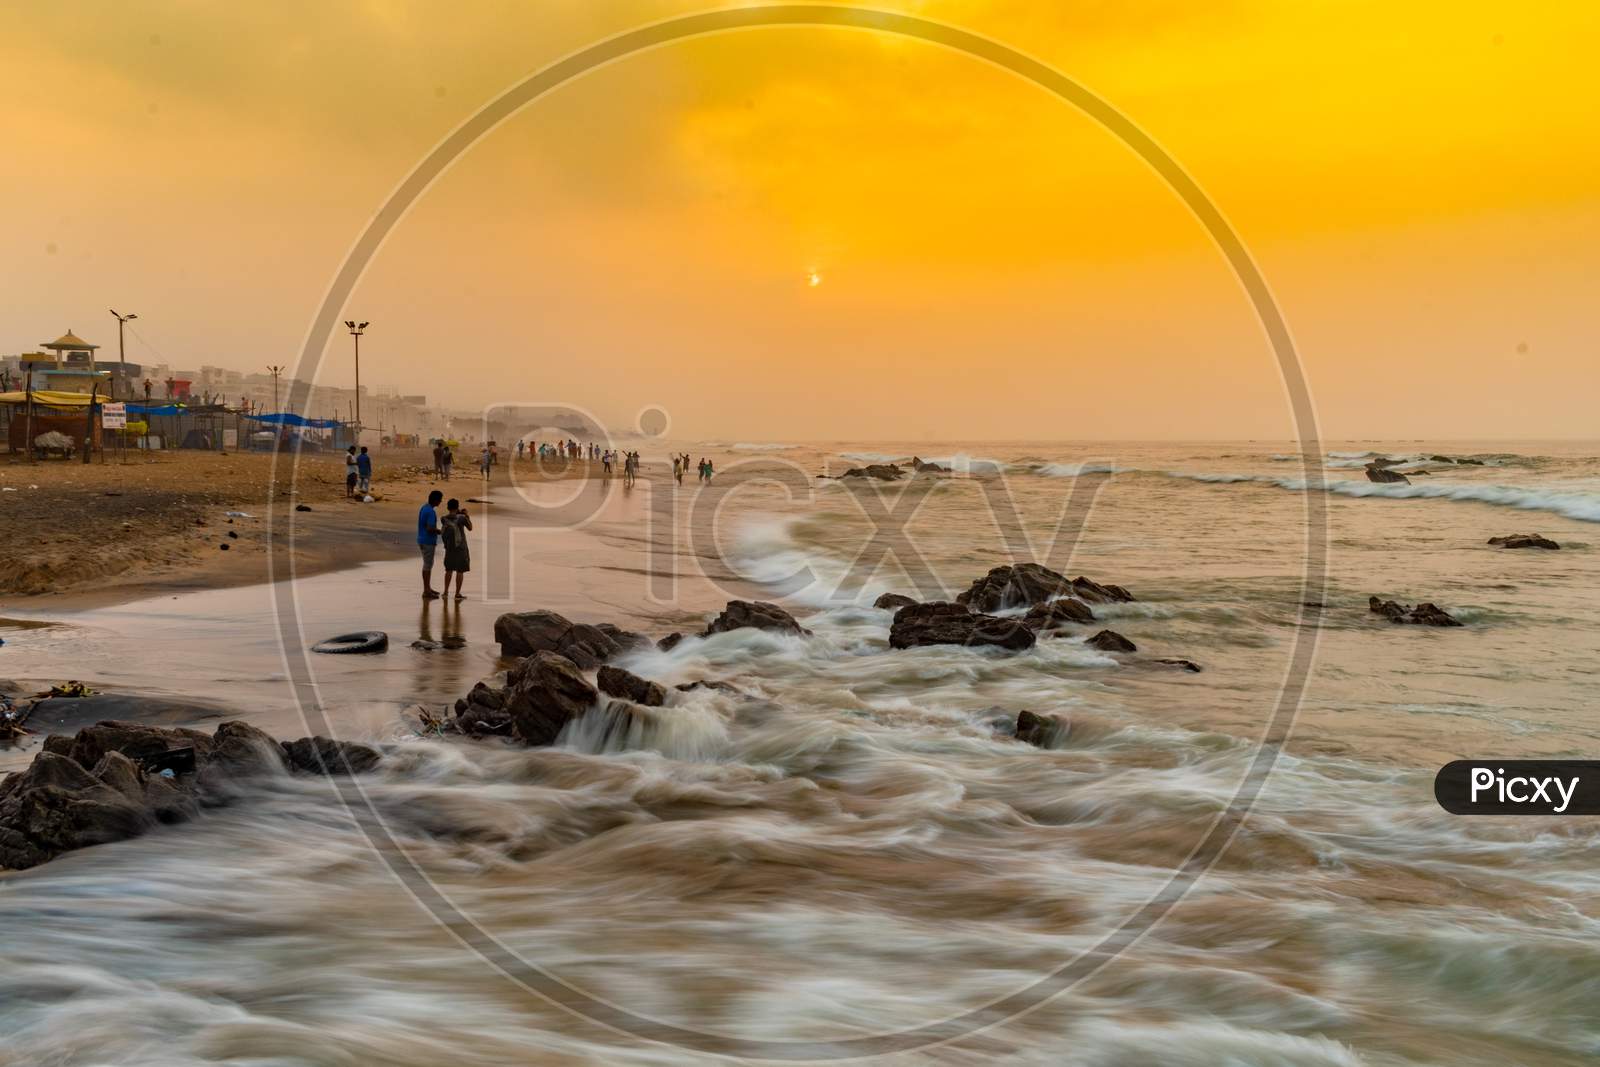 Long Exposure Of People In an Beach With Smooth Waves Transition  And Golden Sunset Sky in Background